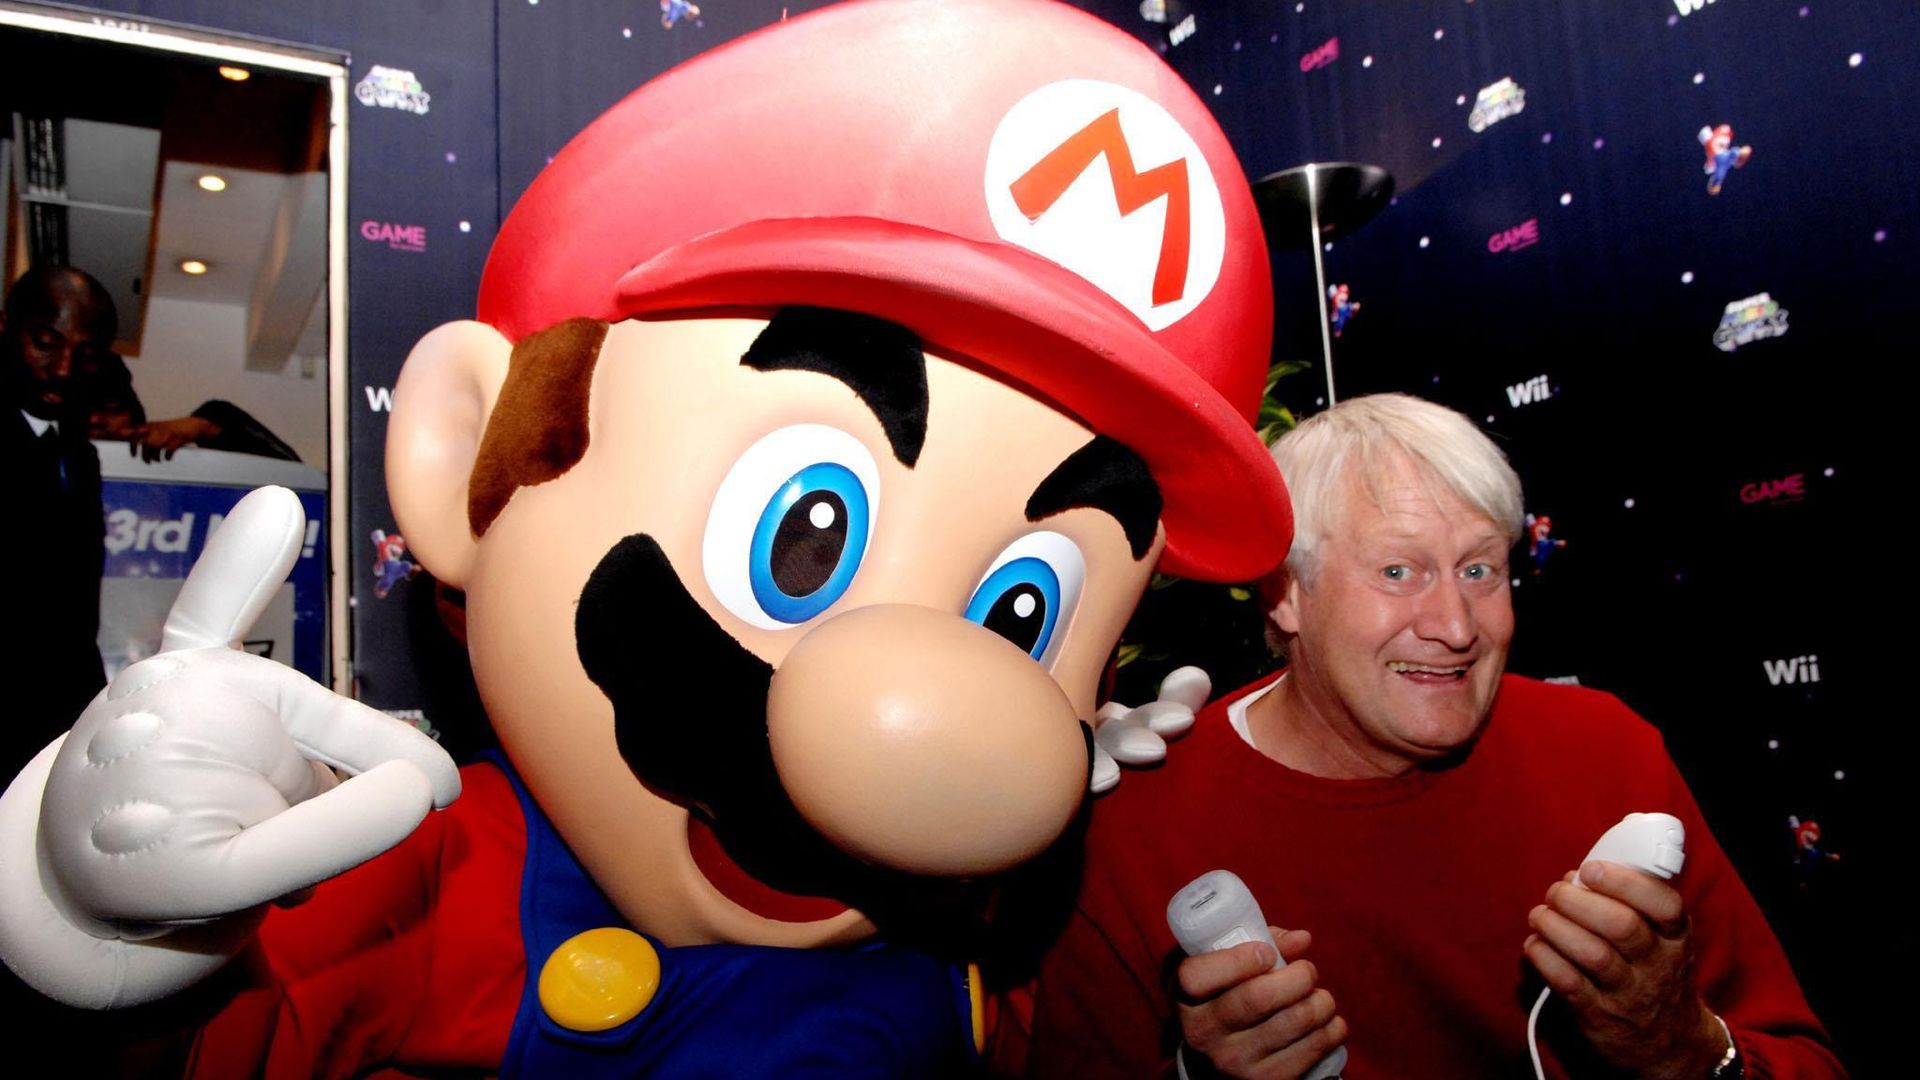 Photo of person in a Super Mario costume standing next to Charles Martinet